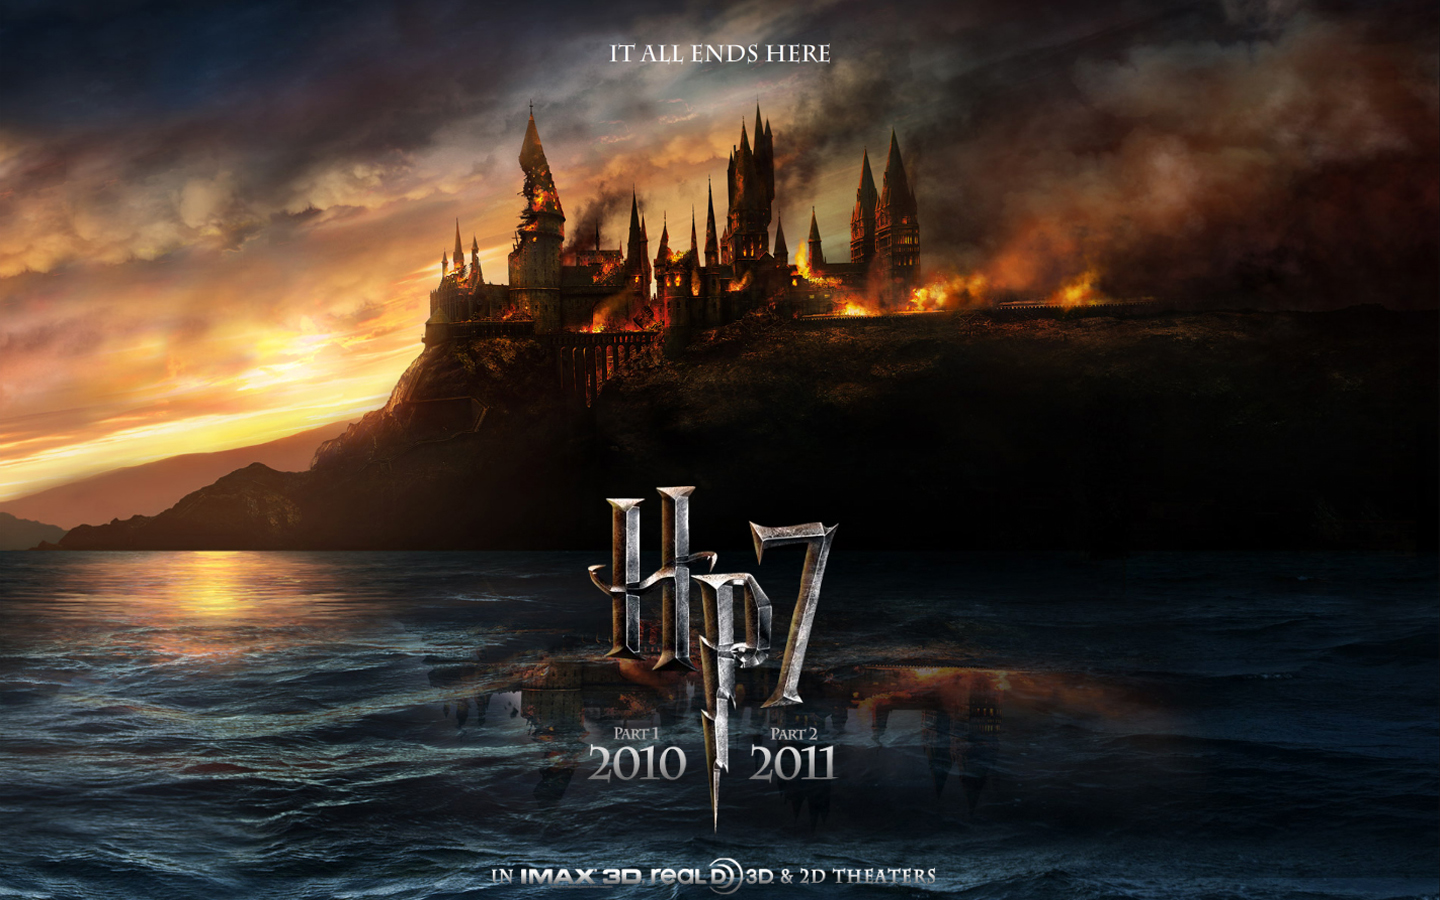 hogwarts castle, movie, harry potter and the deathly hallows: part 1, castle, fire, harry potter